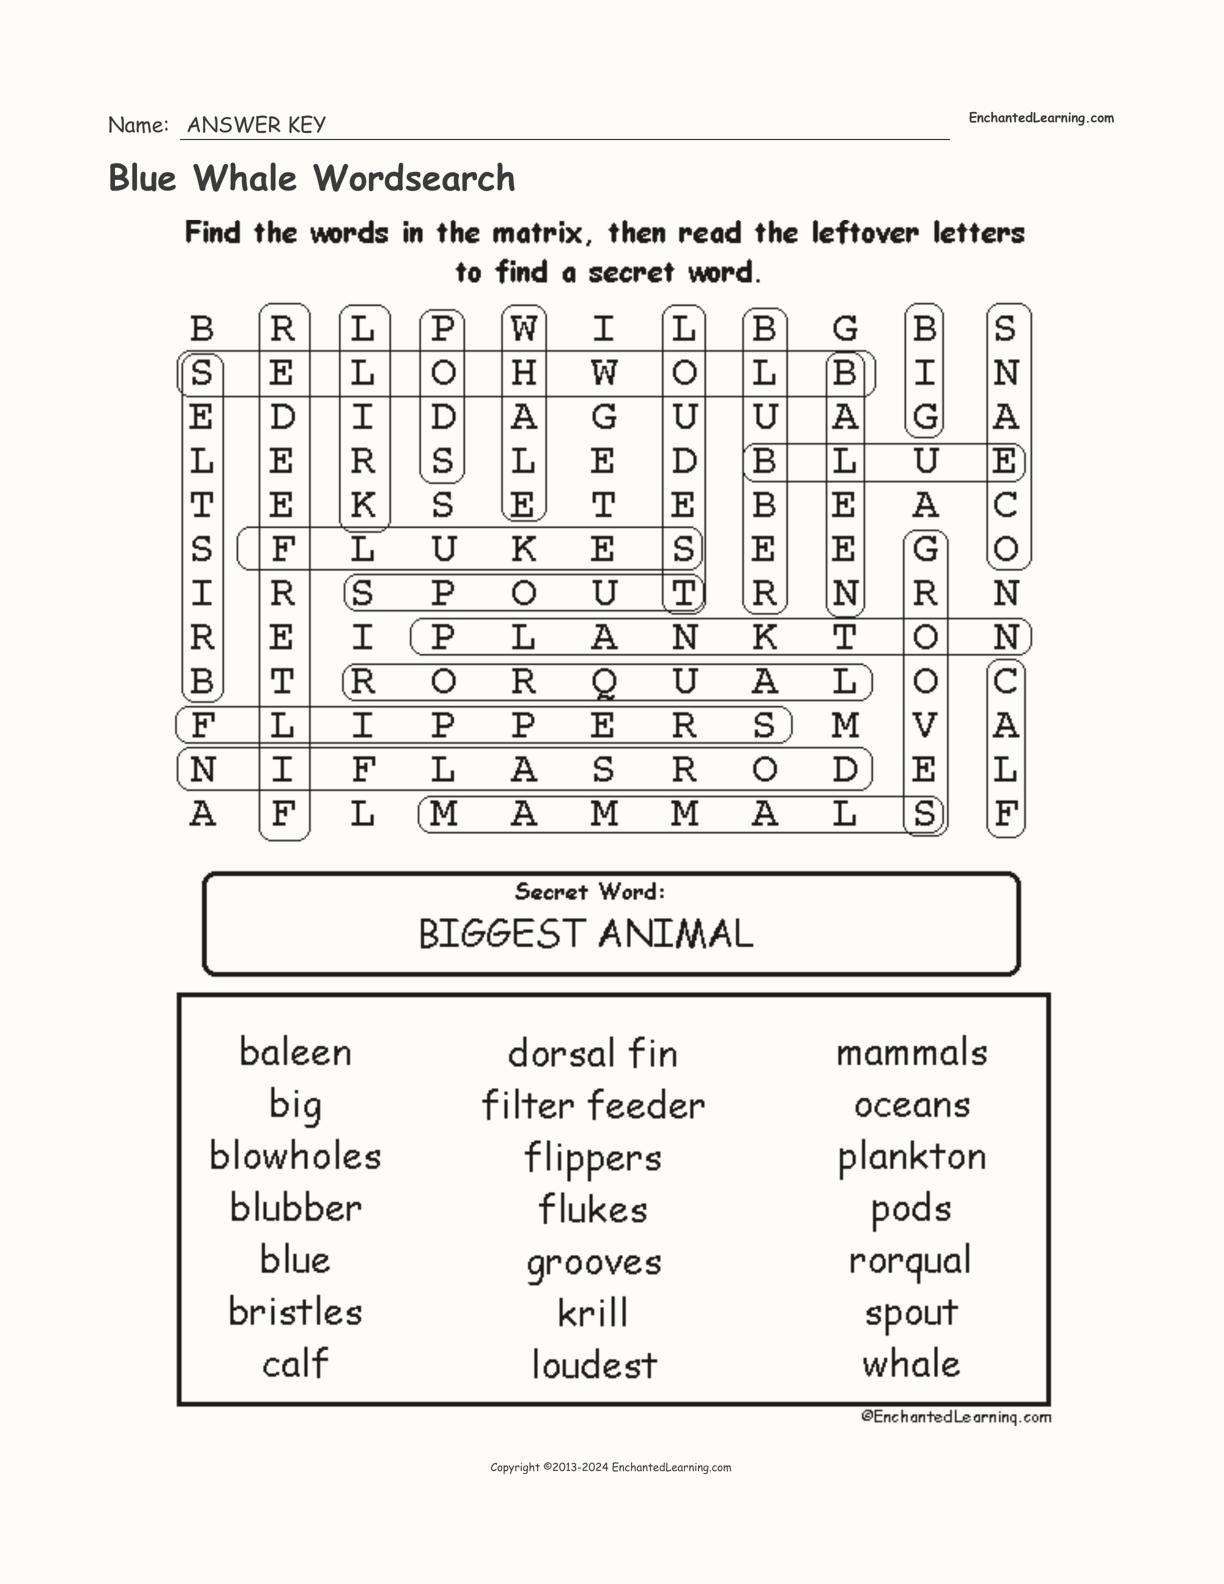 Blue Whale Wordsearch interactive worksheet page 2